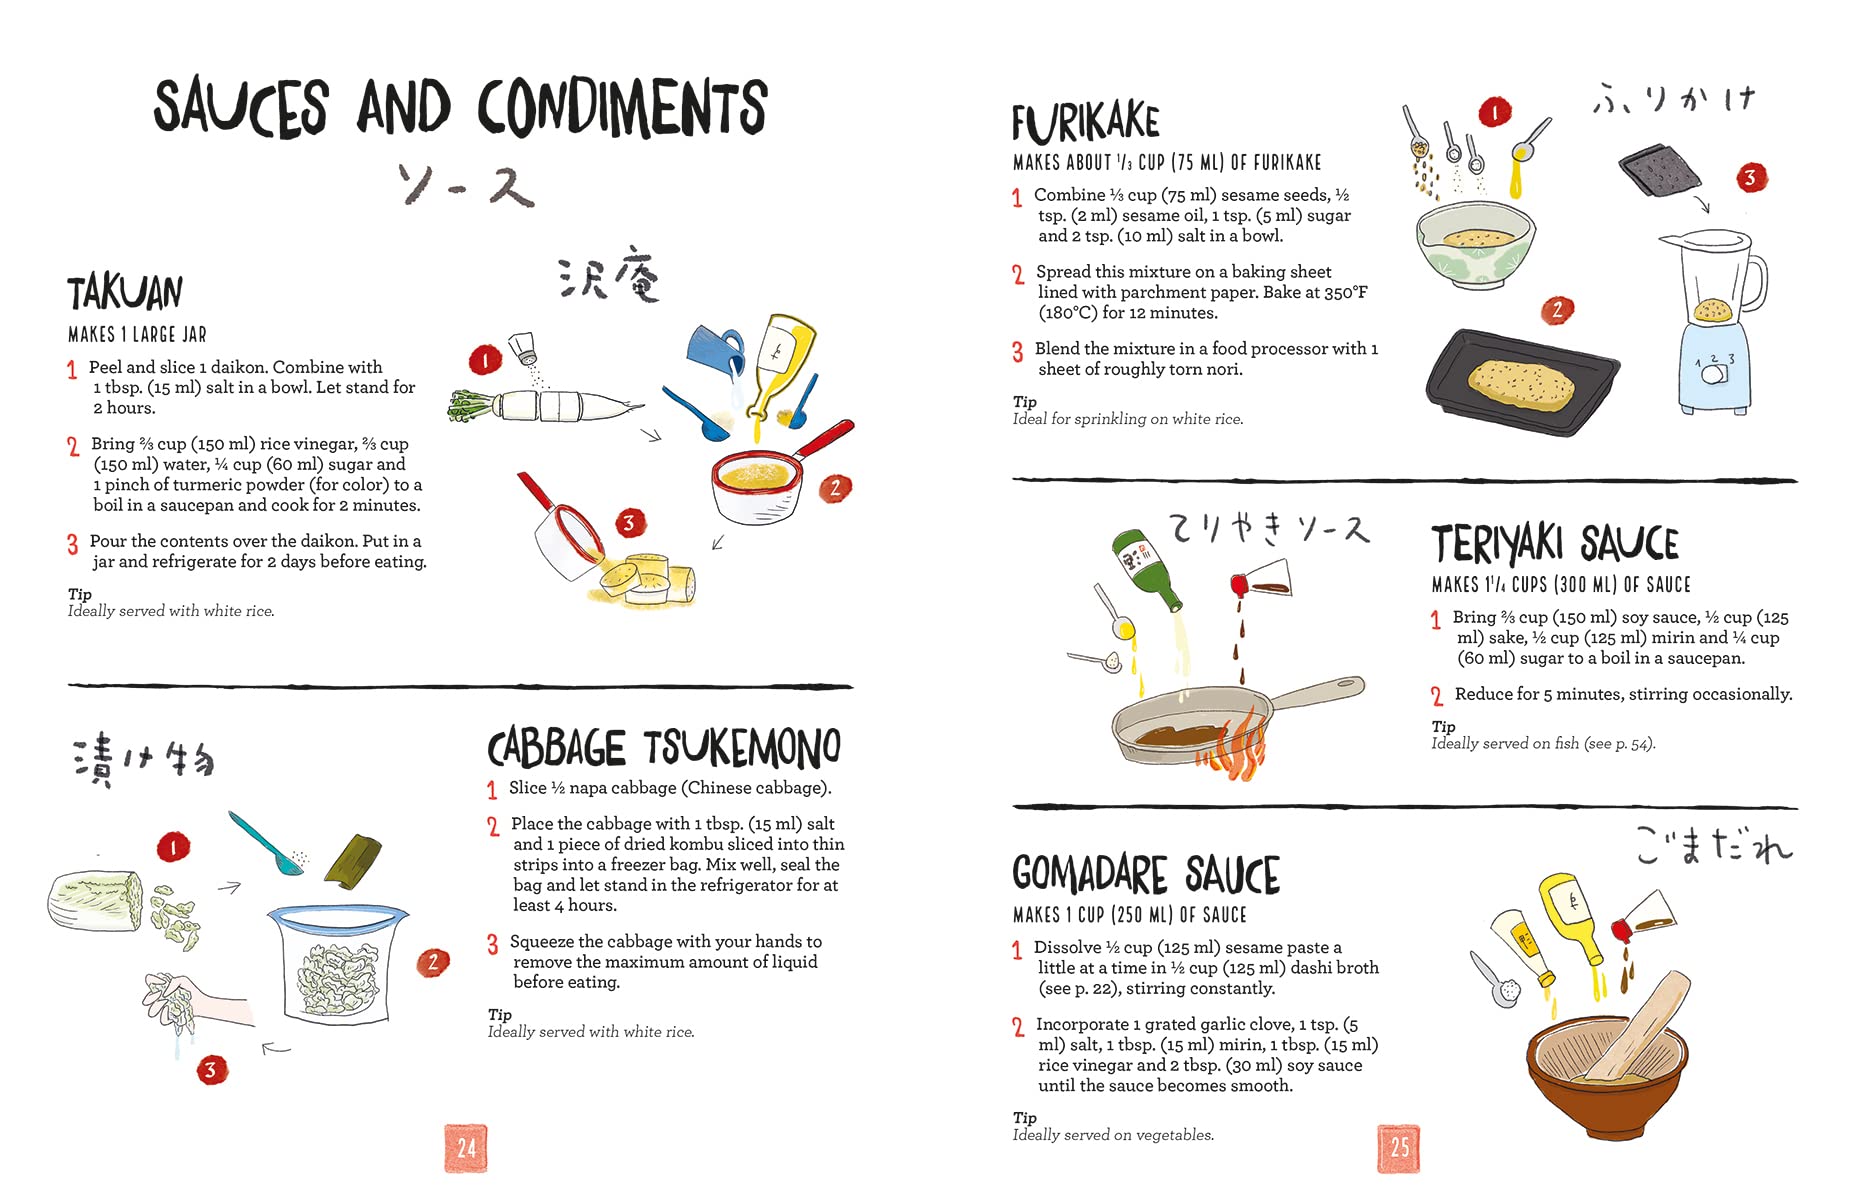 Japanese Cuisine: An Illustrated Guide